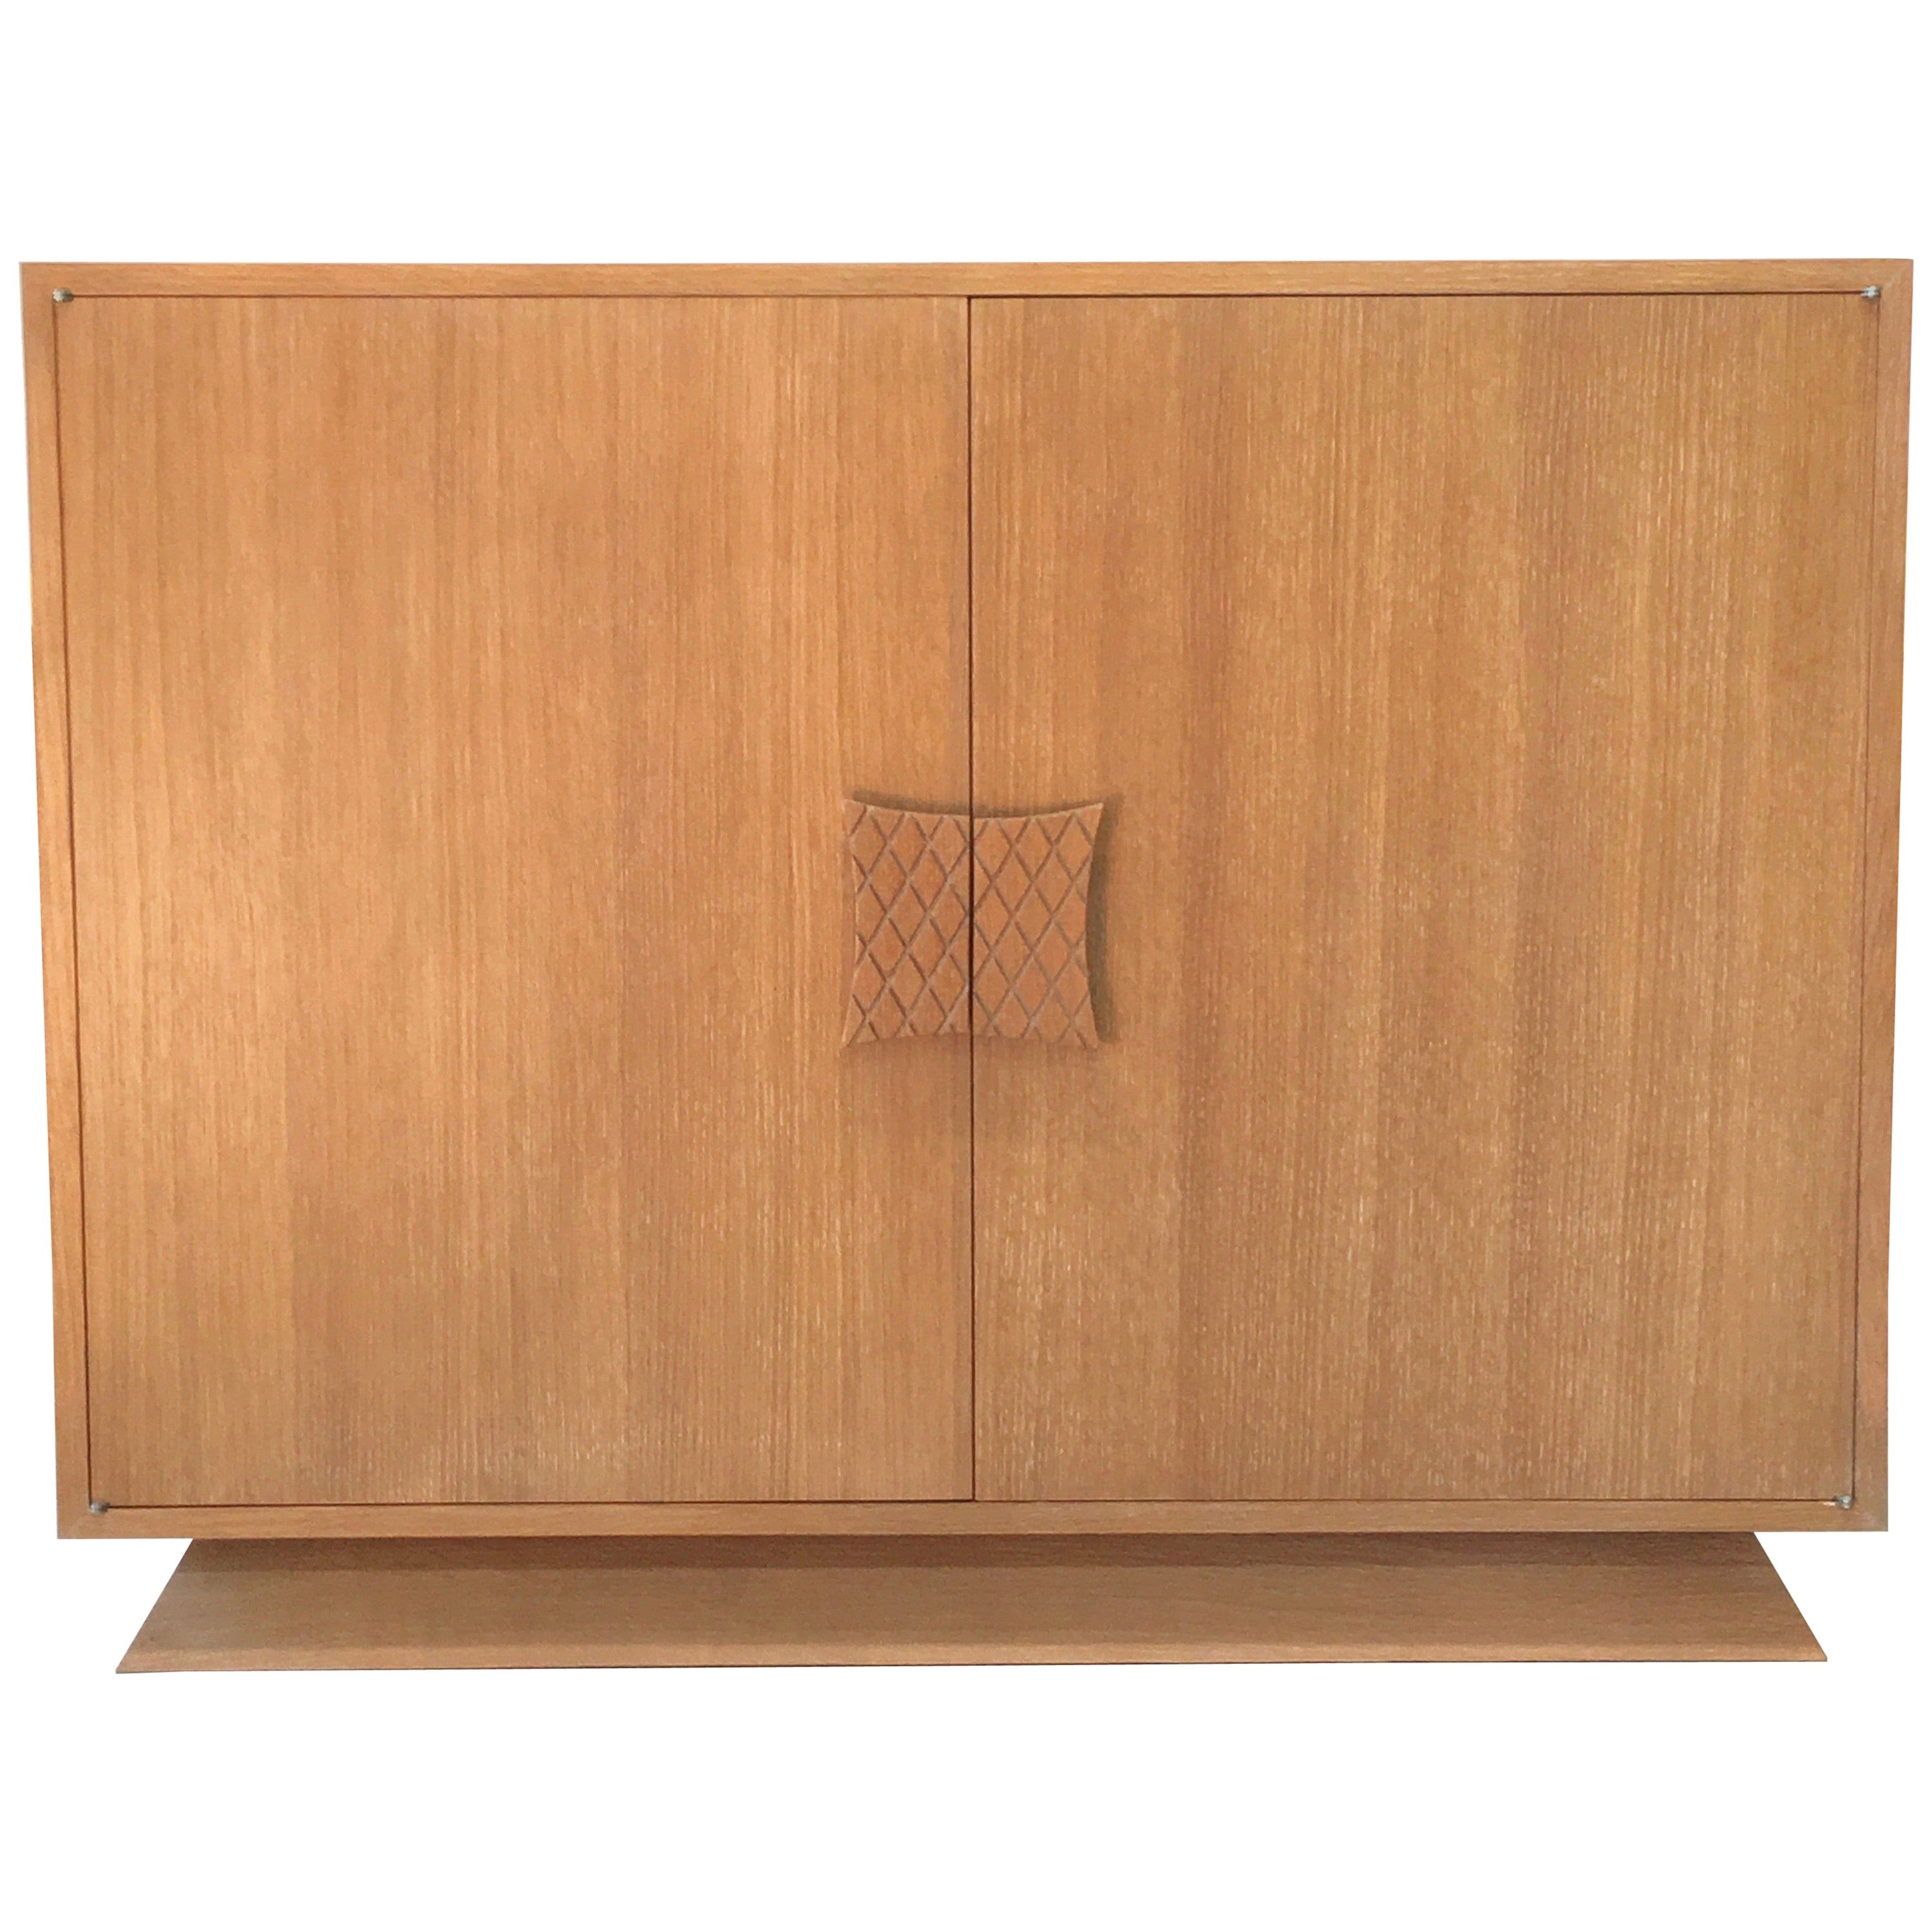 Mid Century Modern Dry Bars – 586 For Sale At 1stdibs With Emerald Cubes Credenzas (View 12 of 30)